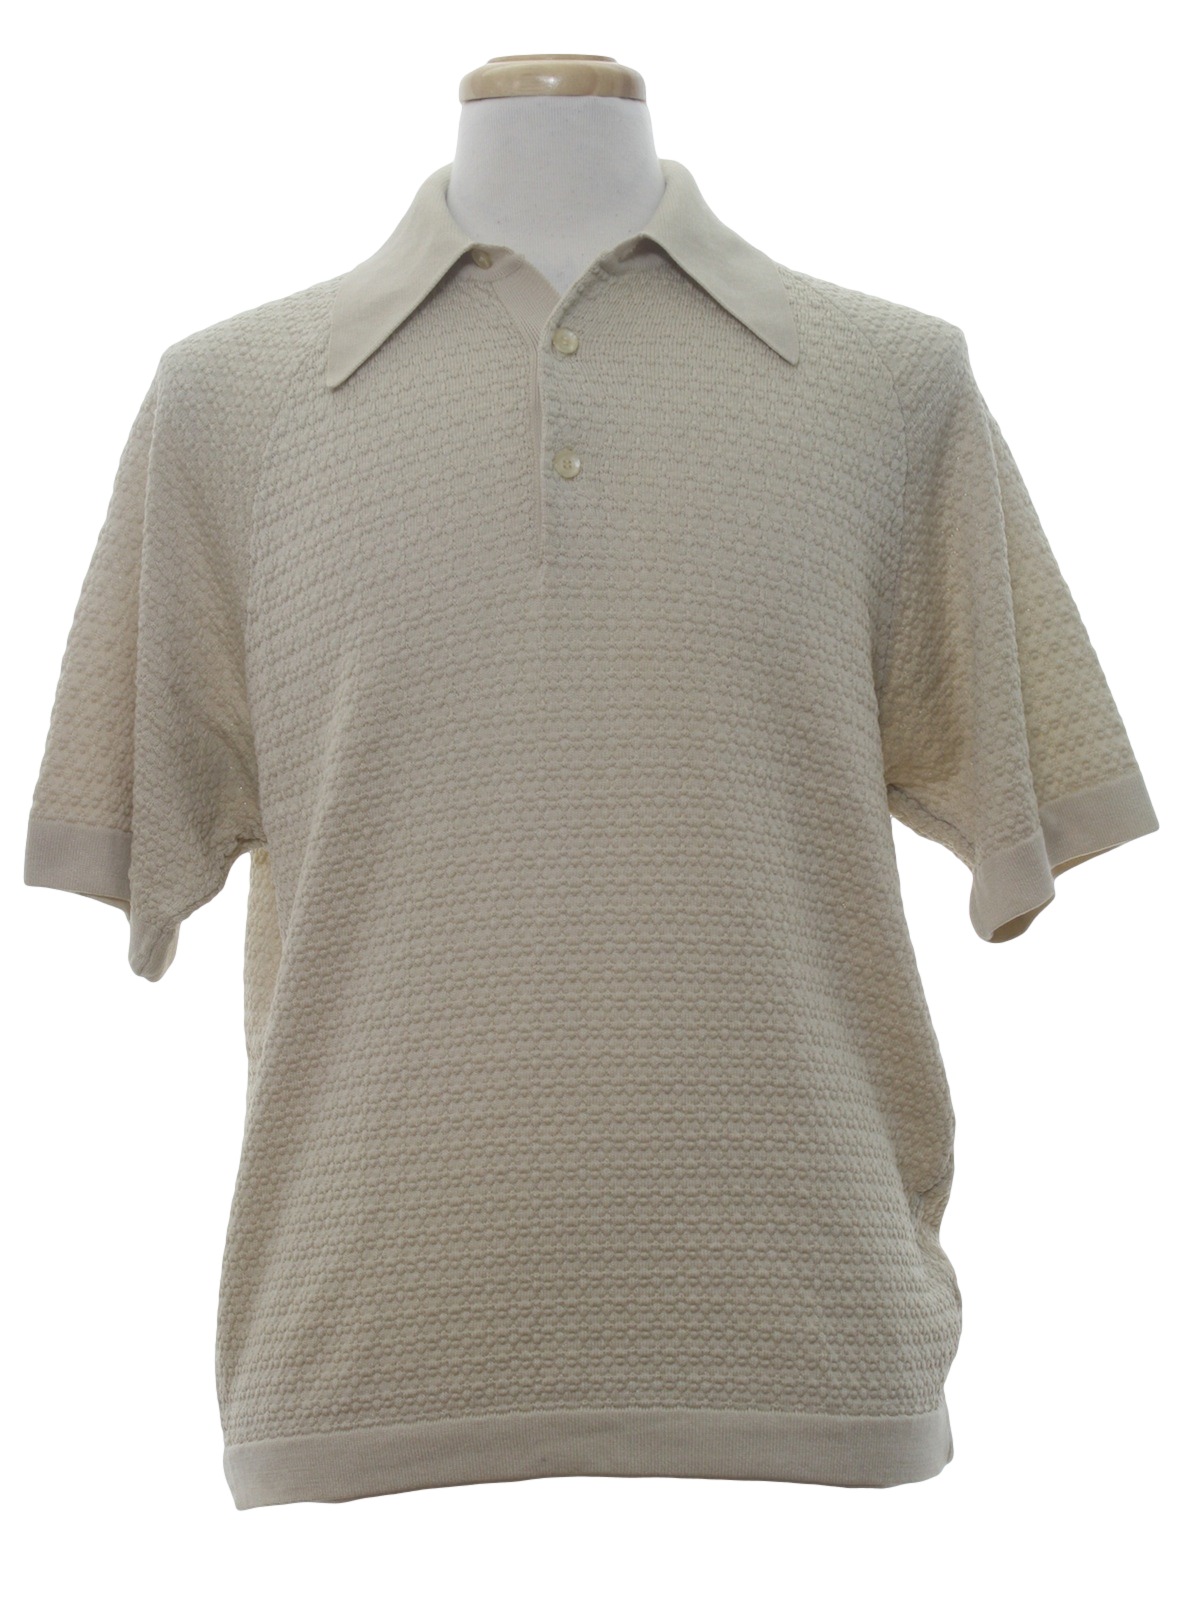 Retro 1970's Knit Shirt (Donegal) : 70s -Donegal- Mens beige acetate ...